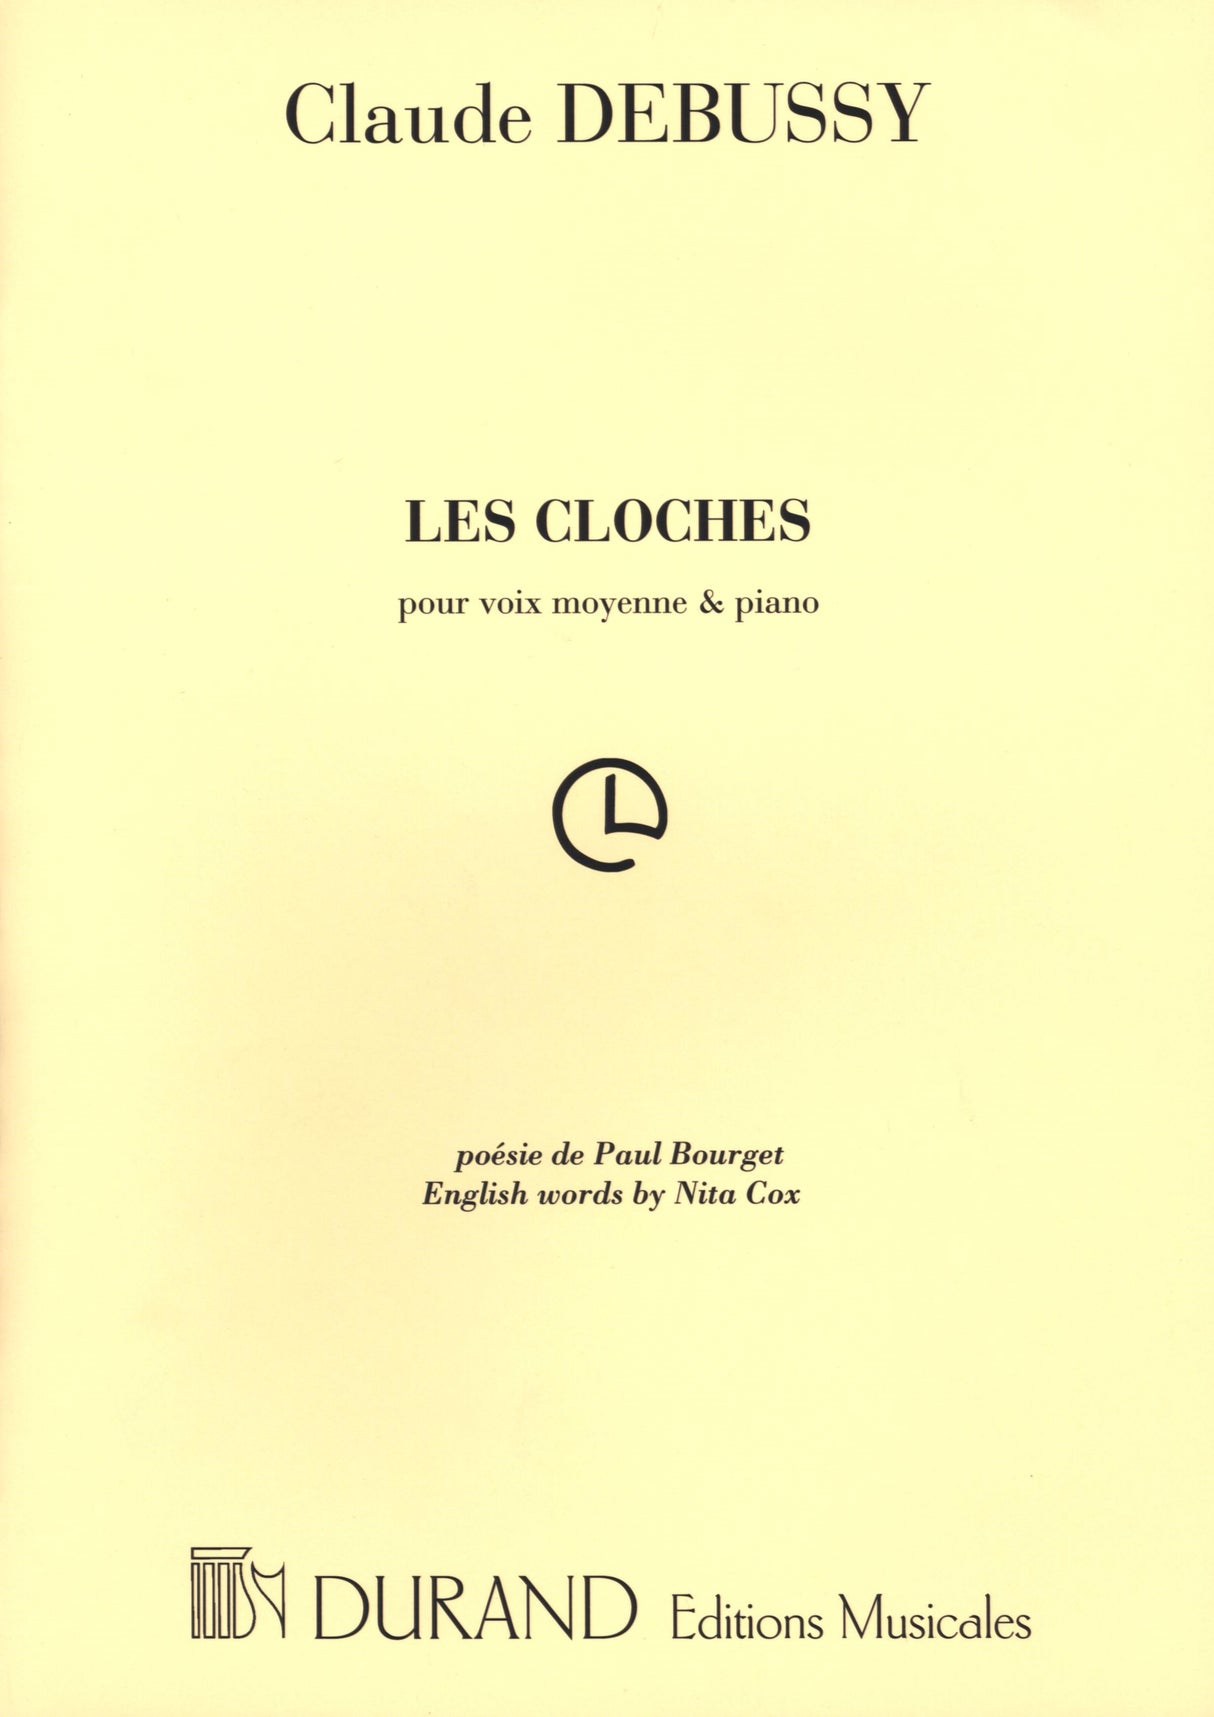 Debussy: Les cloches